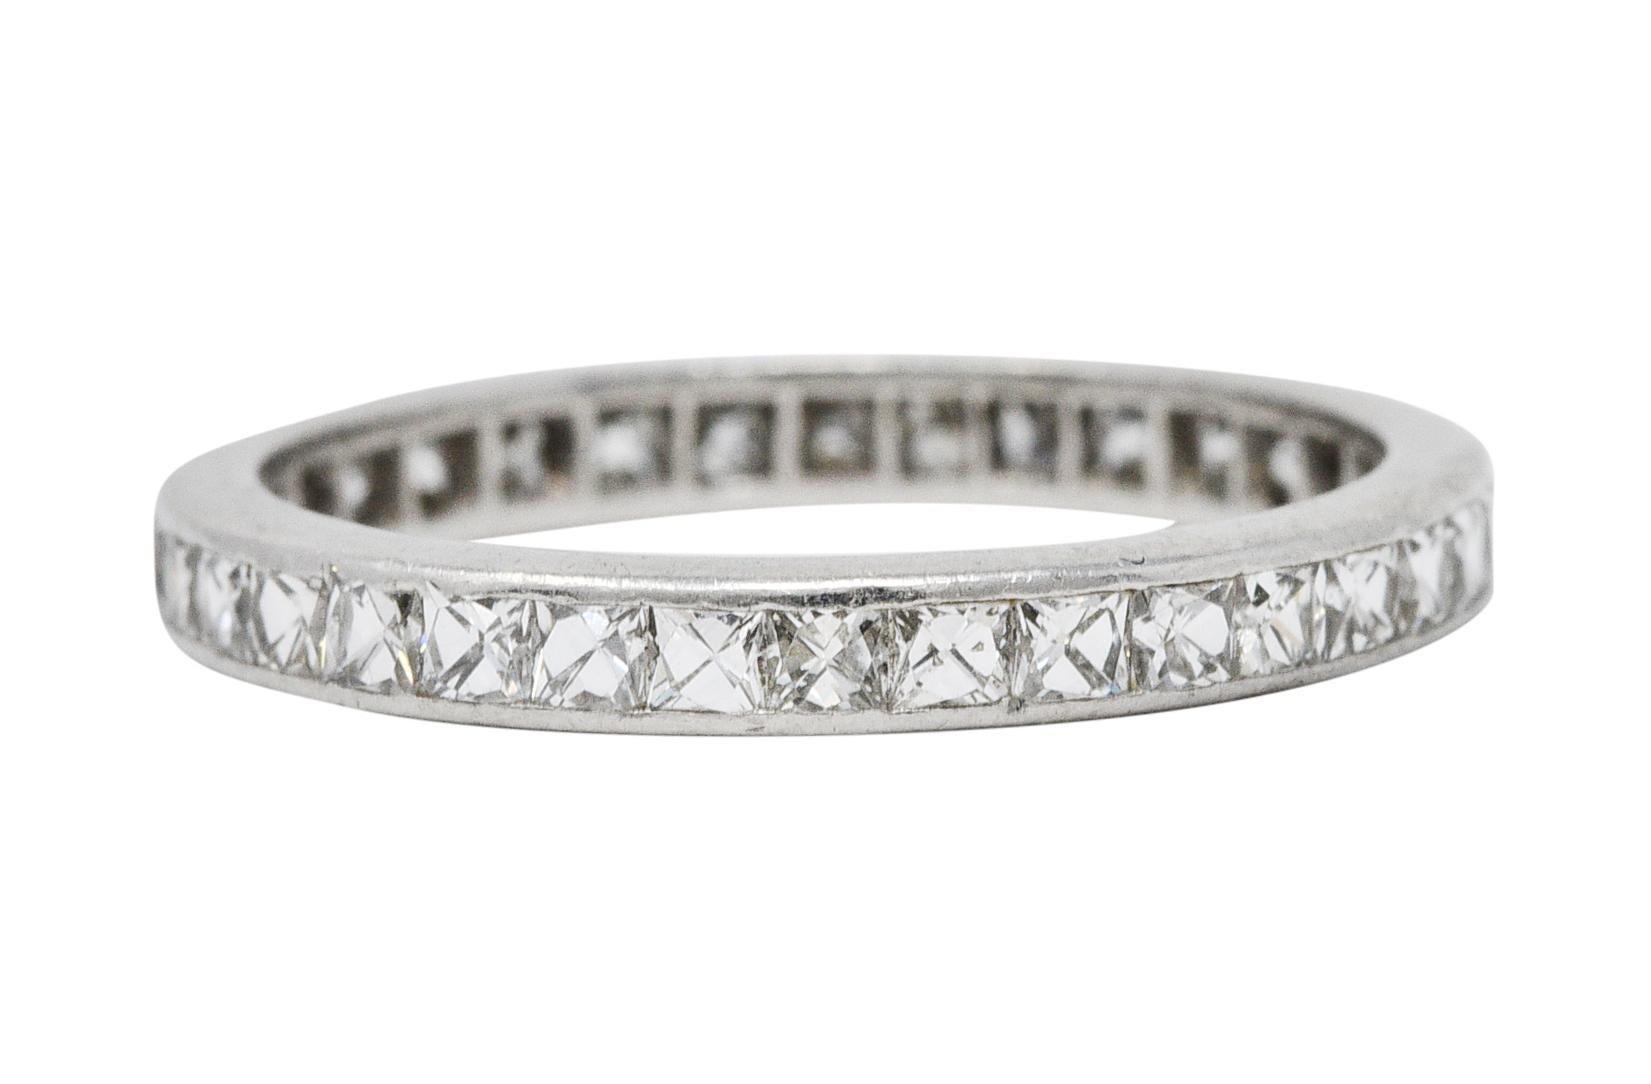 Eternity style band is channel set fully around by French cut diamonds

Weighing in total approximately 1.20 carats with G to I color and VS clarity

Tested as platinum

Circa: 1930s

Ring Size: 5 1/4 & not sizable

Measures North to South 2.3 mm